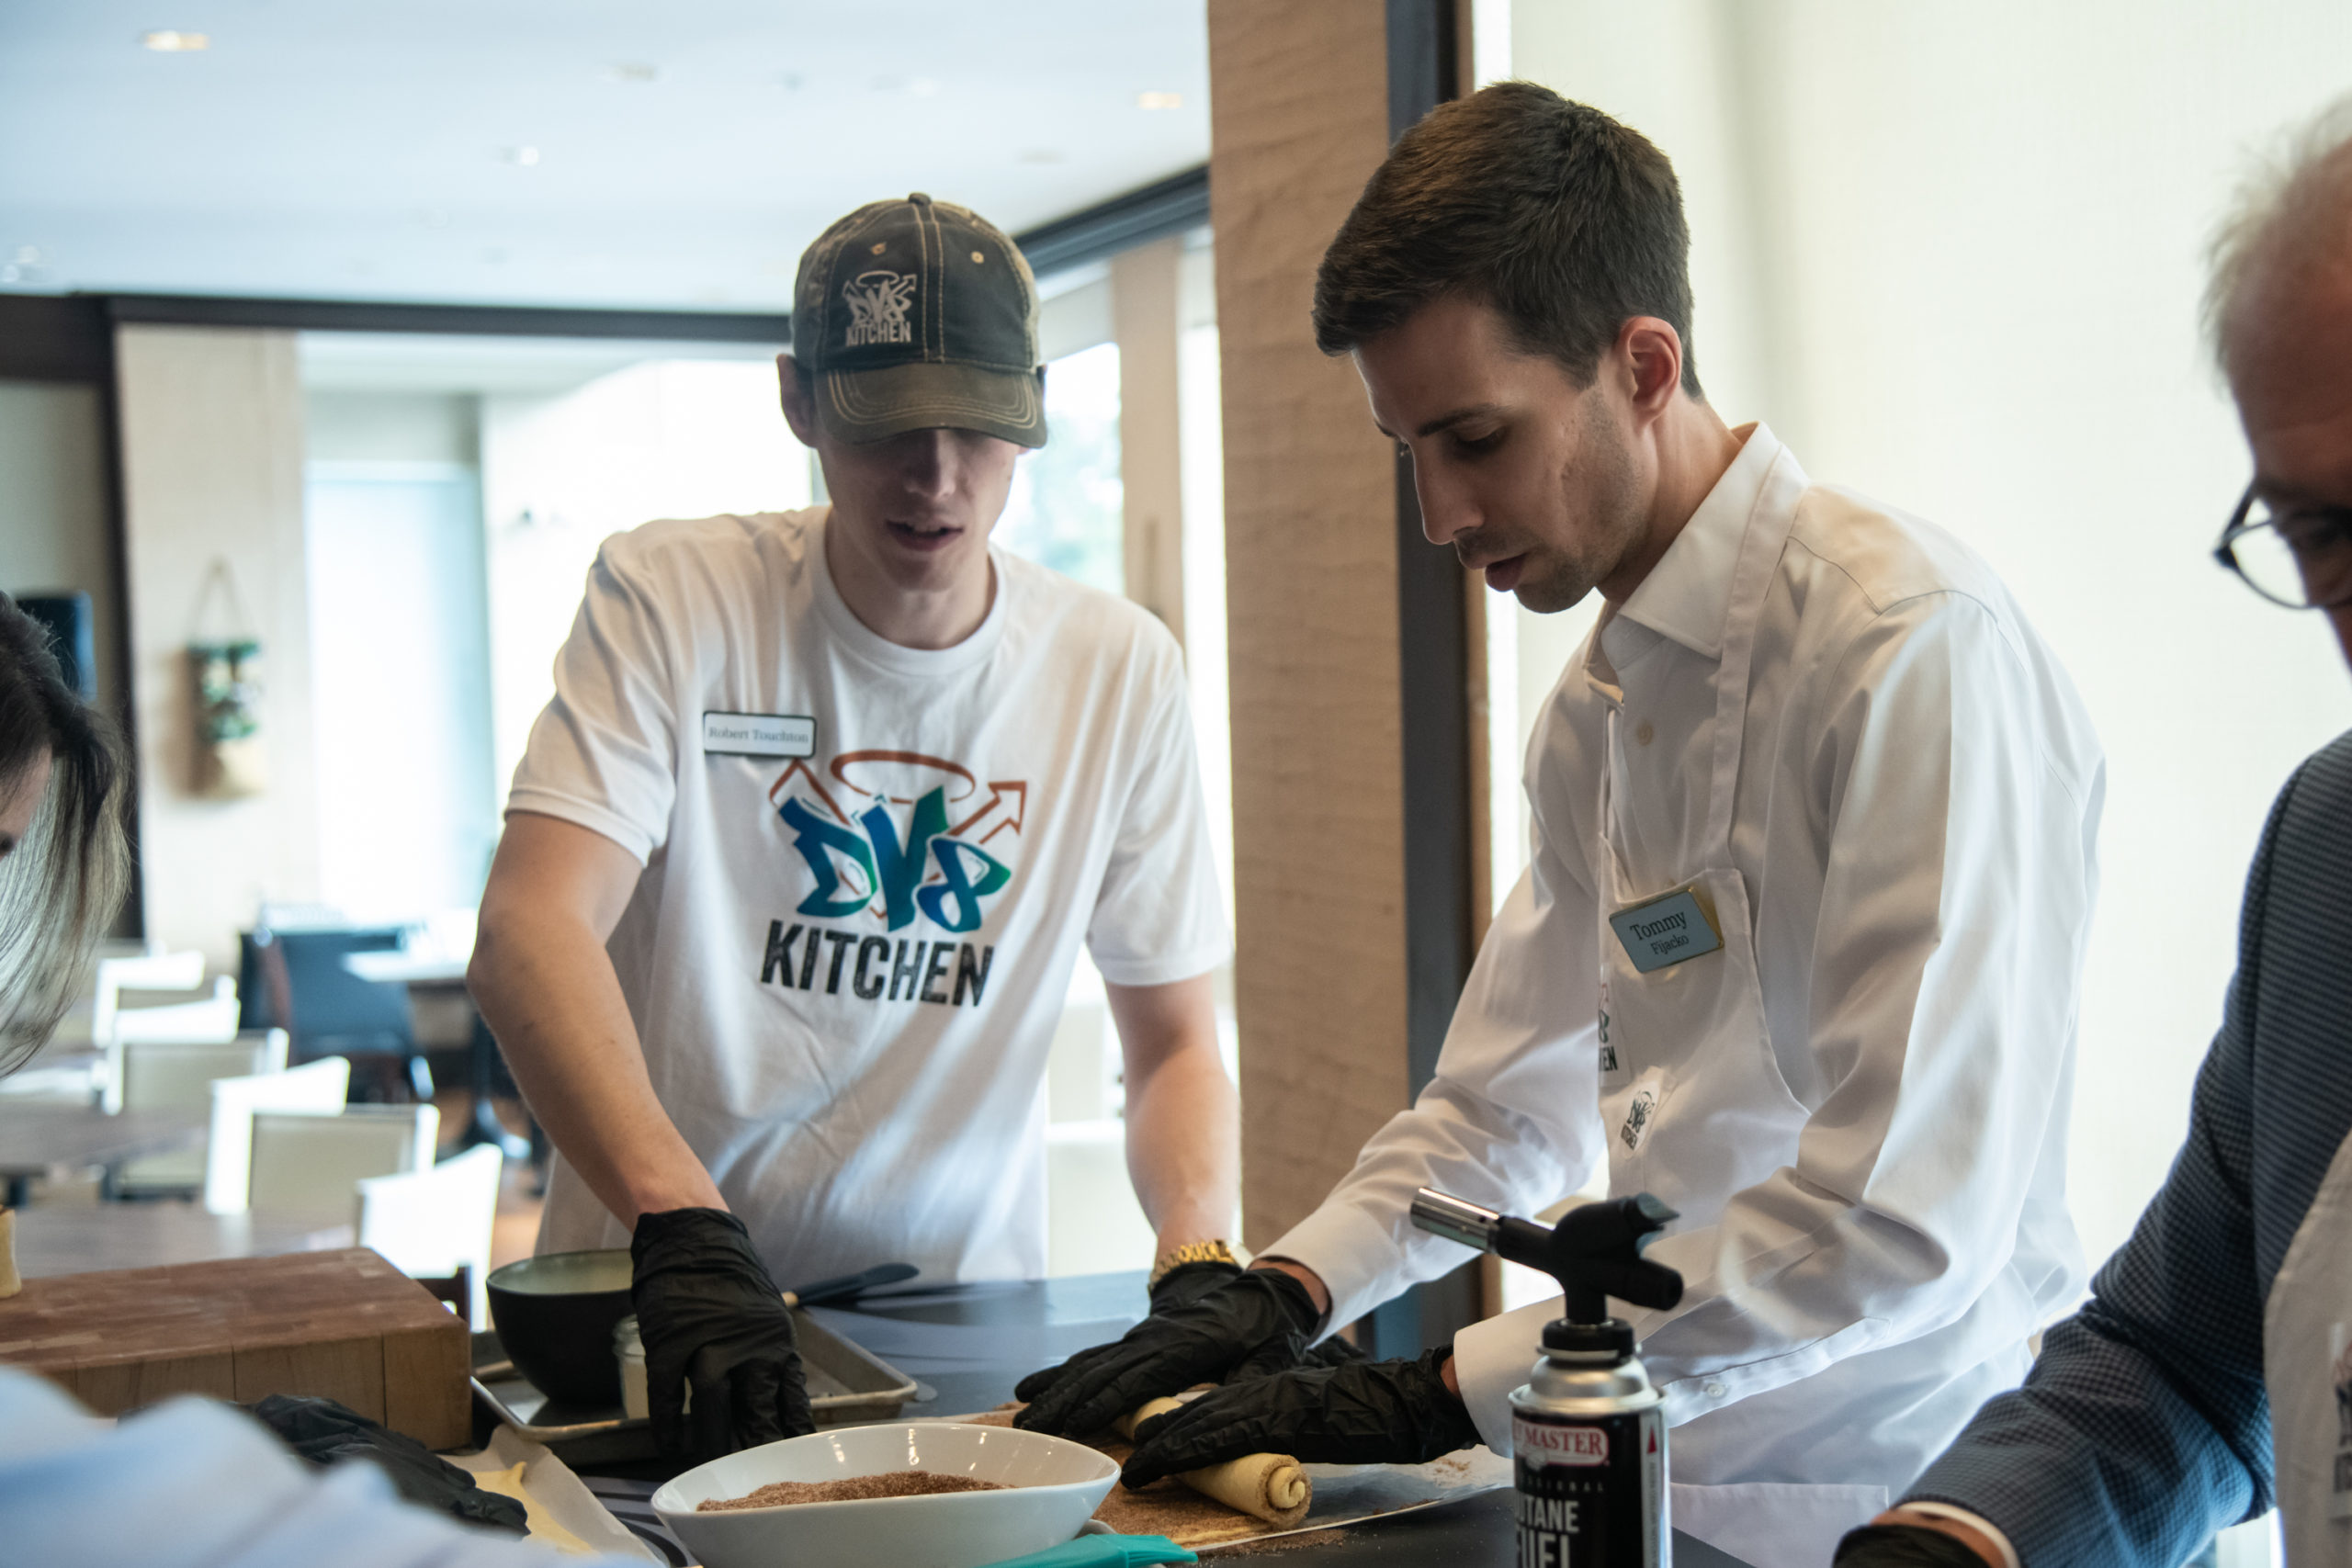 Robert from DV8 Kitchen walks participant Tommy through the dough-shaping process during a cooking demonstration